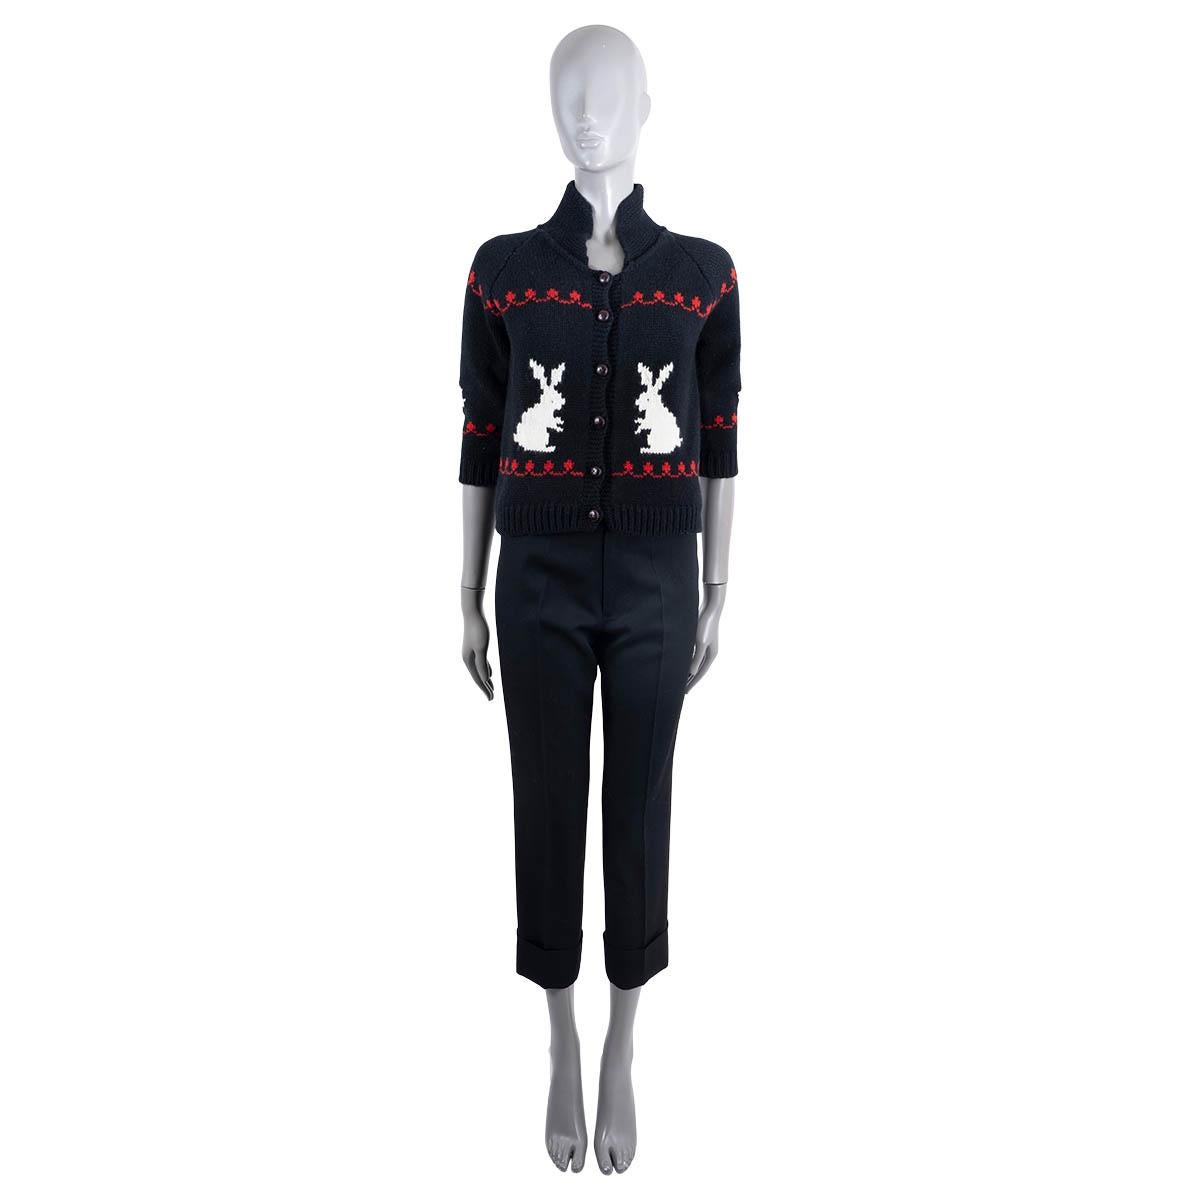 100% authentic Christian Dior cardigan in black wool (70%) and cashmere (30%). With intarsia rabbits in white and details in red, half raglan sleeves (sleeve circumference measured from the neck) and stand-up collar. Closes with brown leather